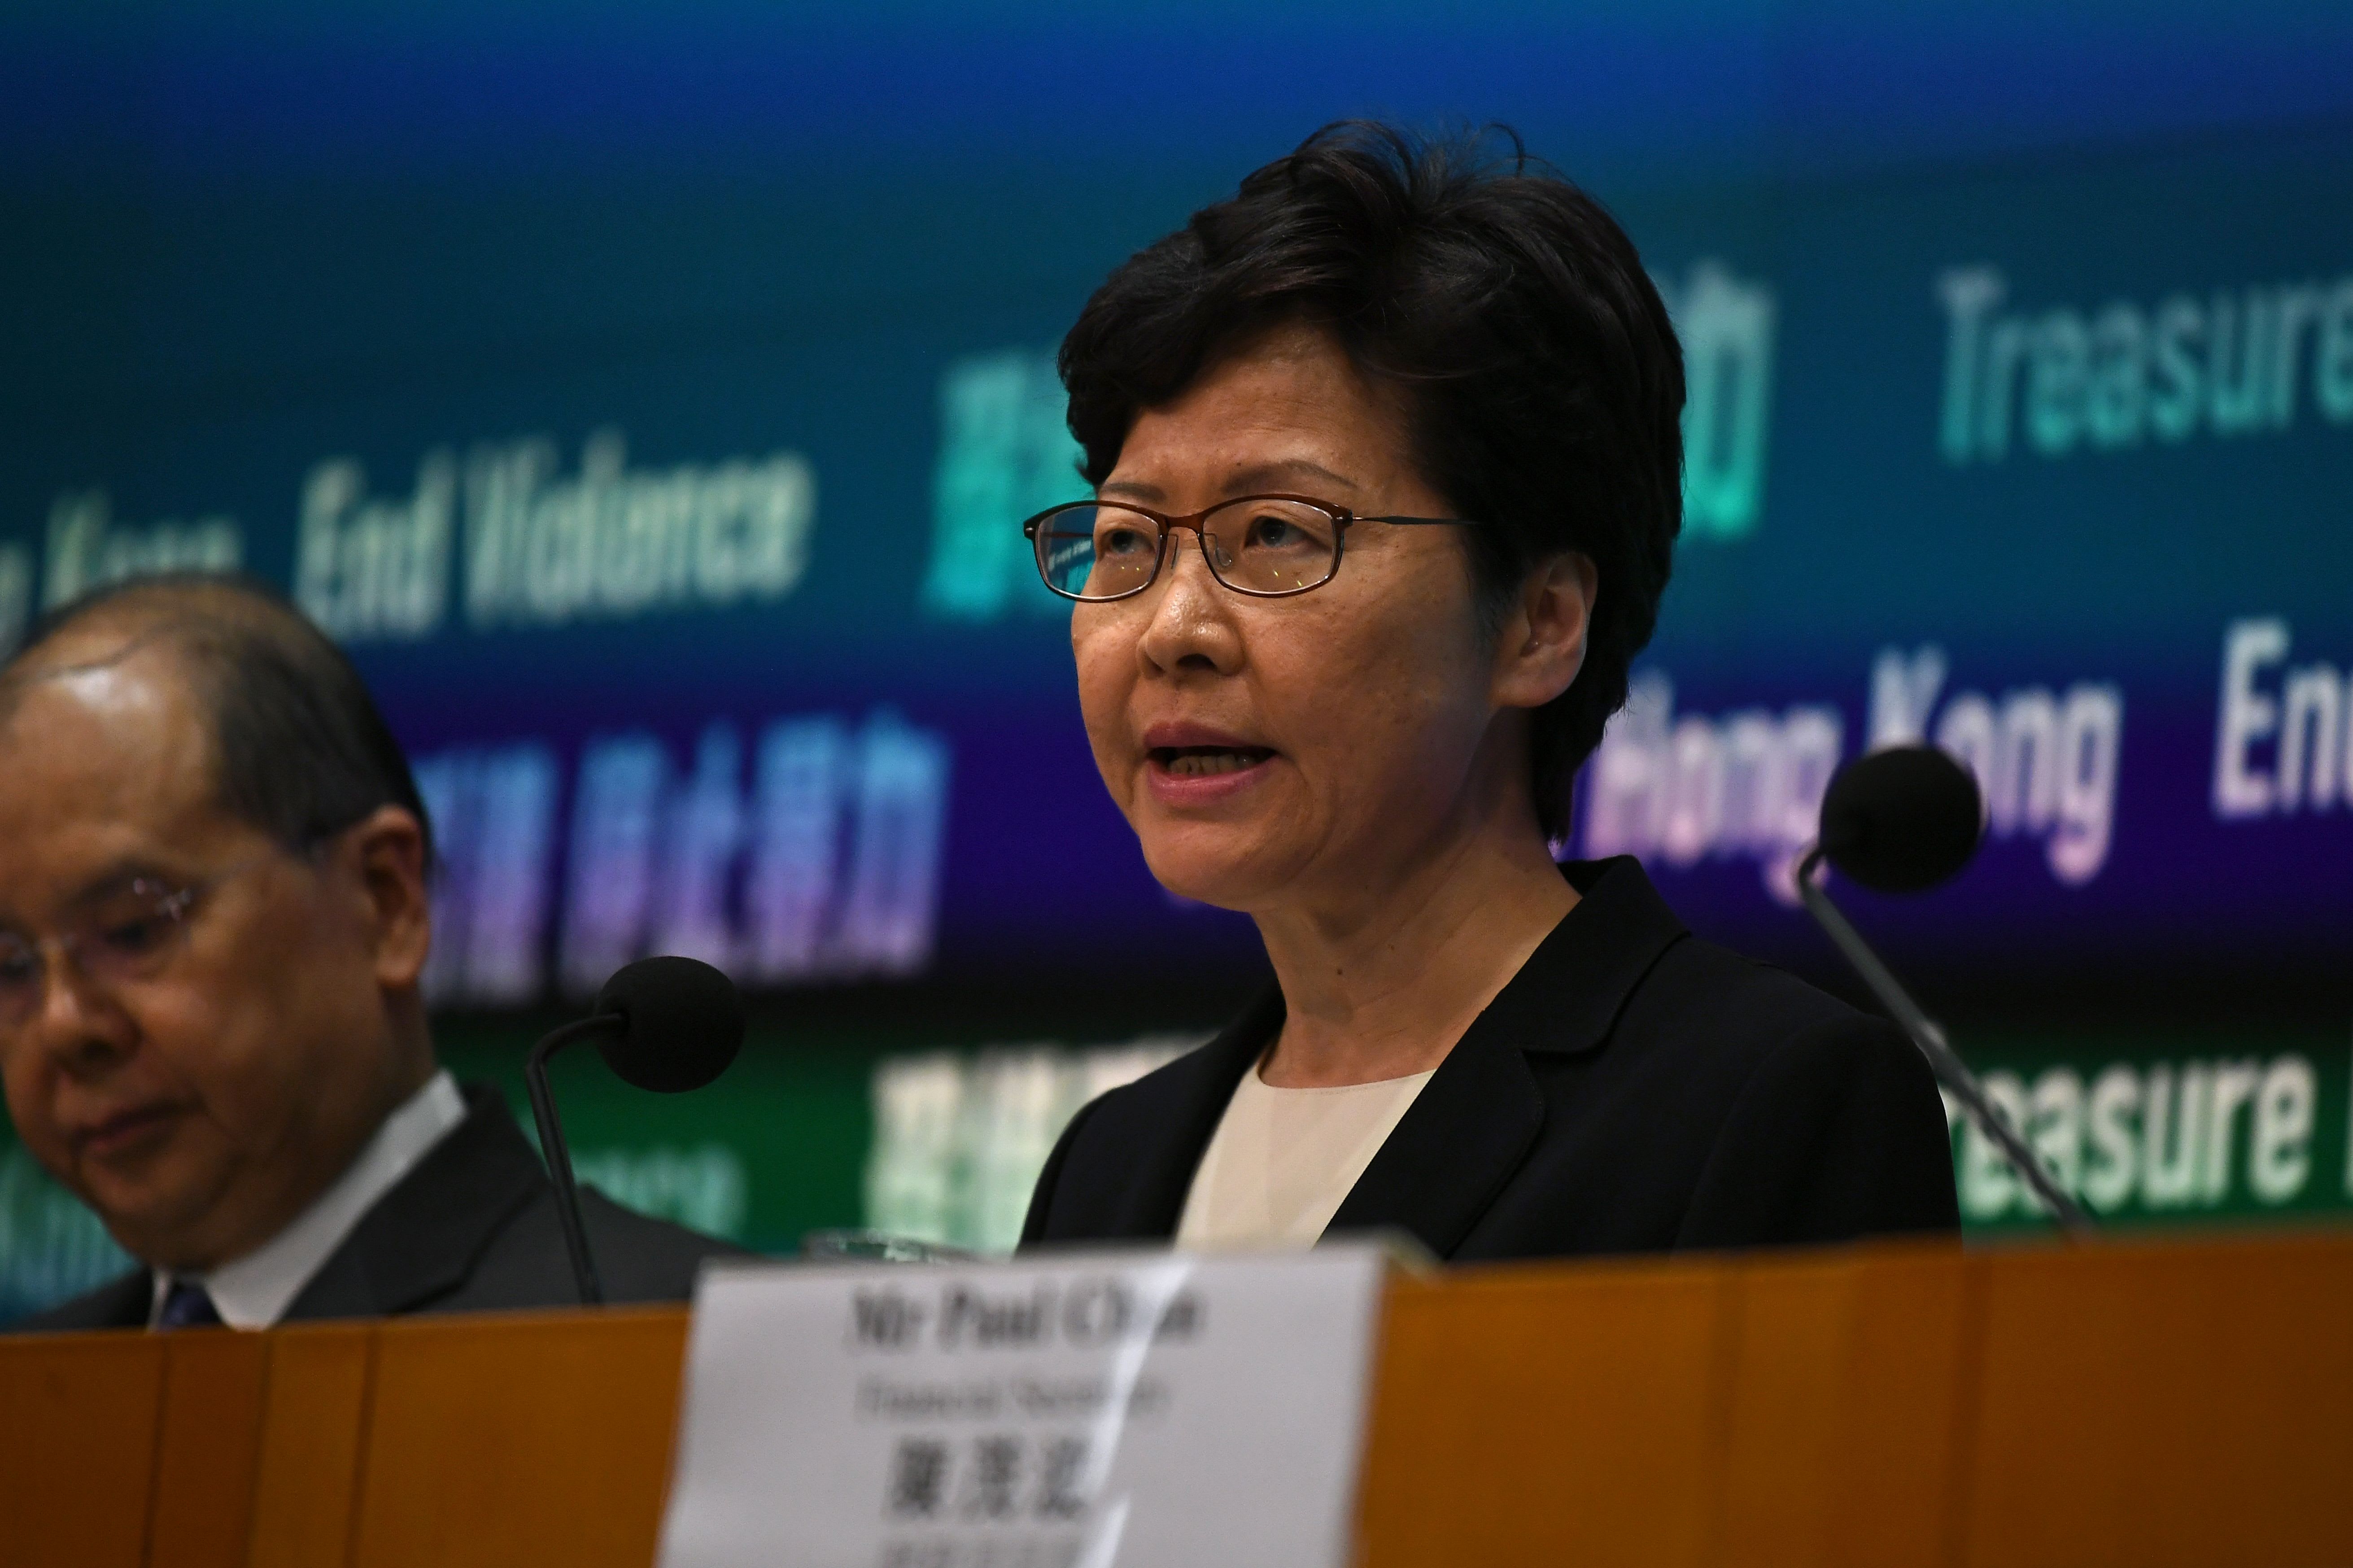 Hong Kong leader Carrie Lam is 'cautiously confident' the city is ready to deal with coronavirus